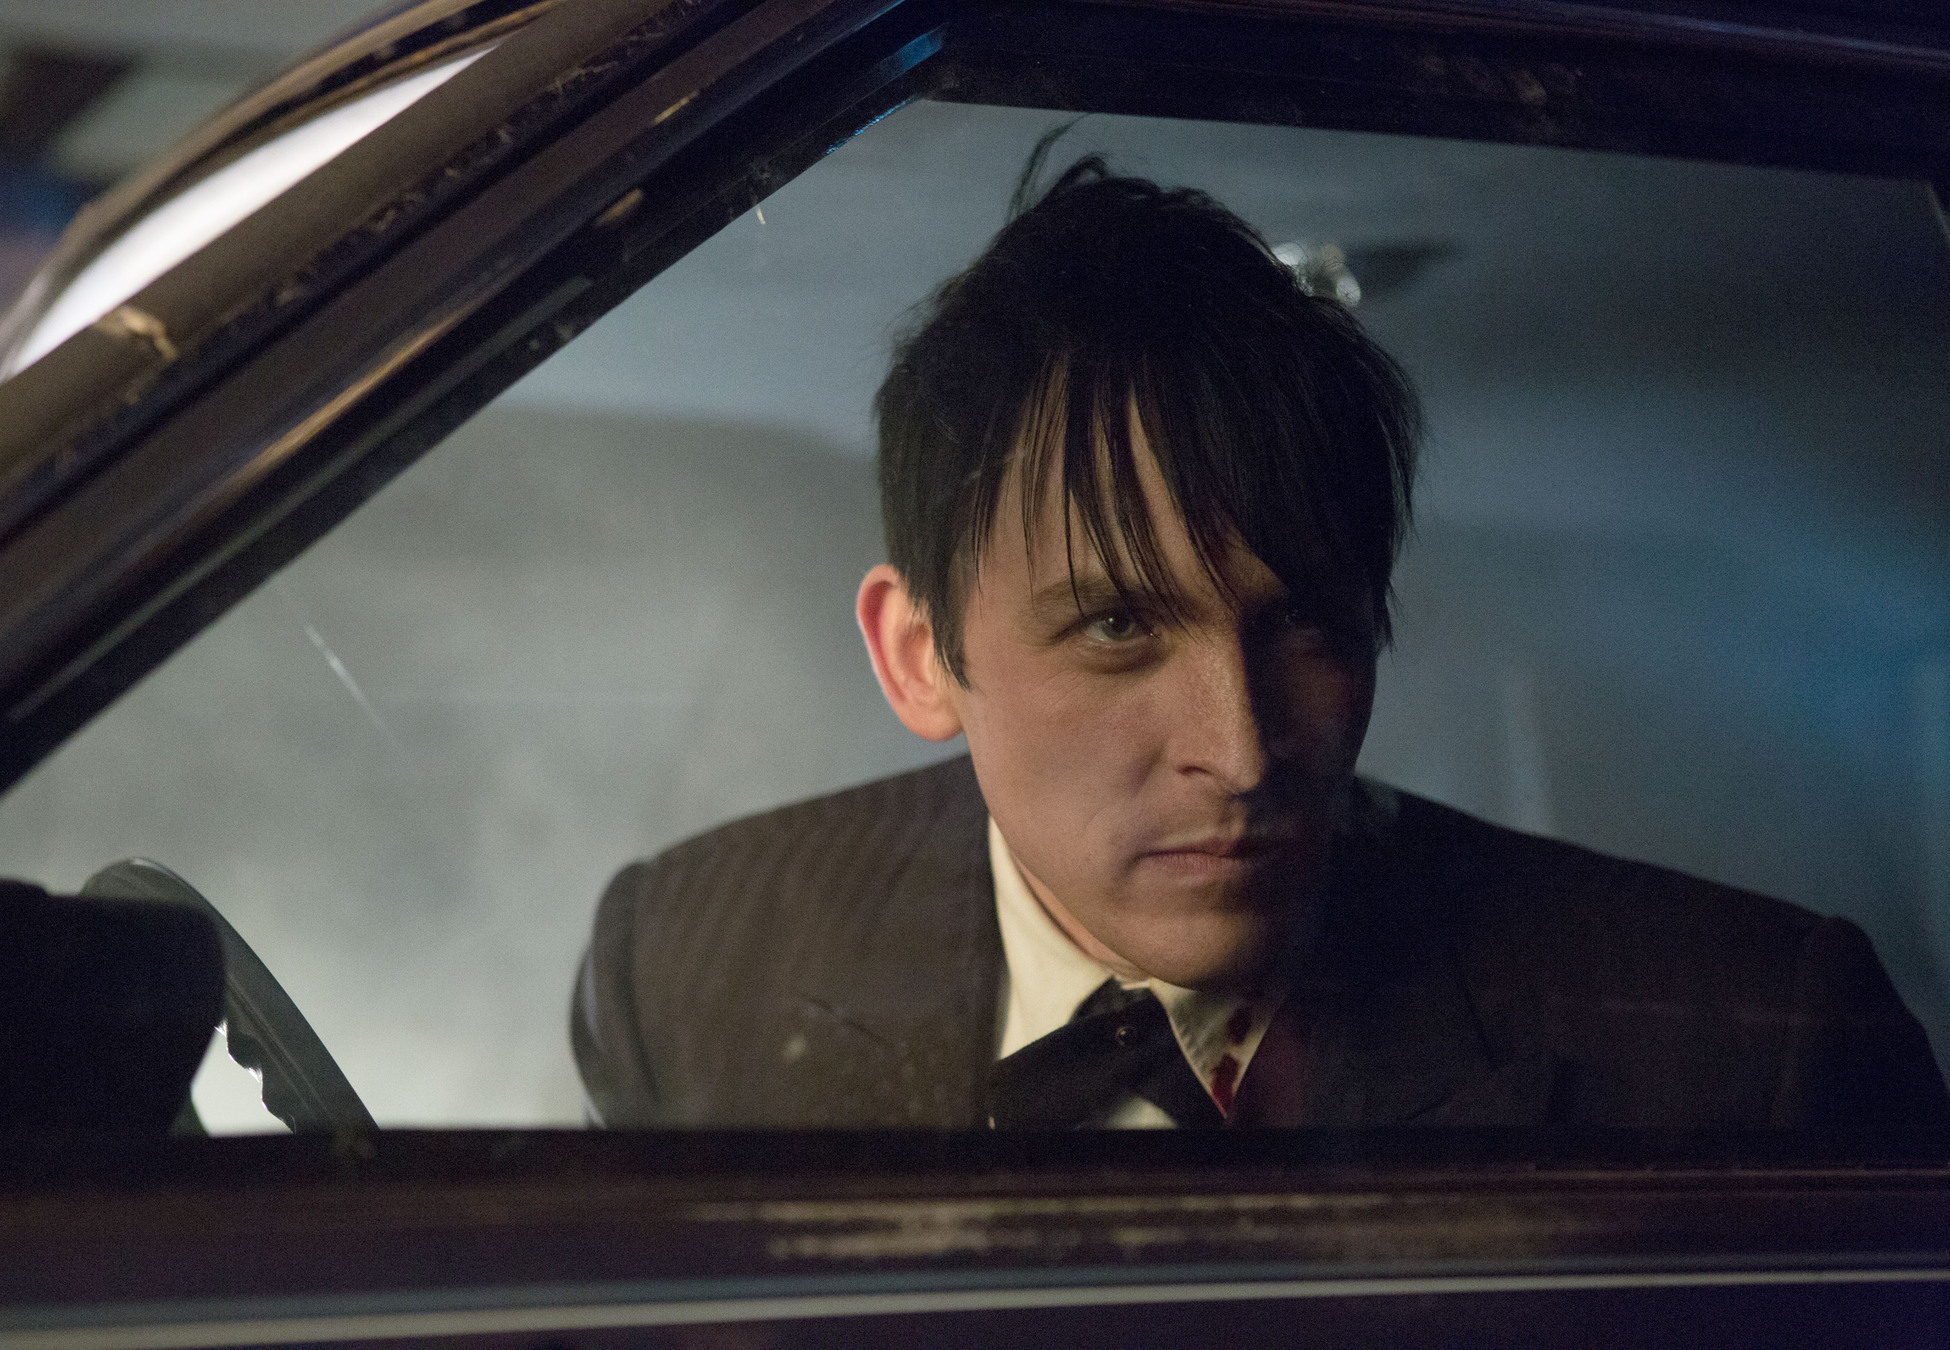 GOTHAM: Oswald Cobblepot (Robin Lord Taylor) uses his powers of persuasion to get out of a tight spot in the "The Fearsome Dr. Crane" episode of GOTHAM airing Monday, Feb. 2 (8:00-9:00 PM ET/PT) on FOX. Â©2015 Fox Broadcasting Co. Cr: Jessica Miglio/FOX